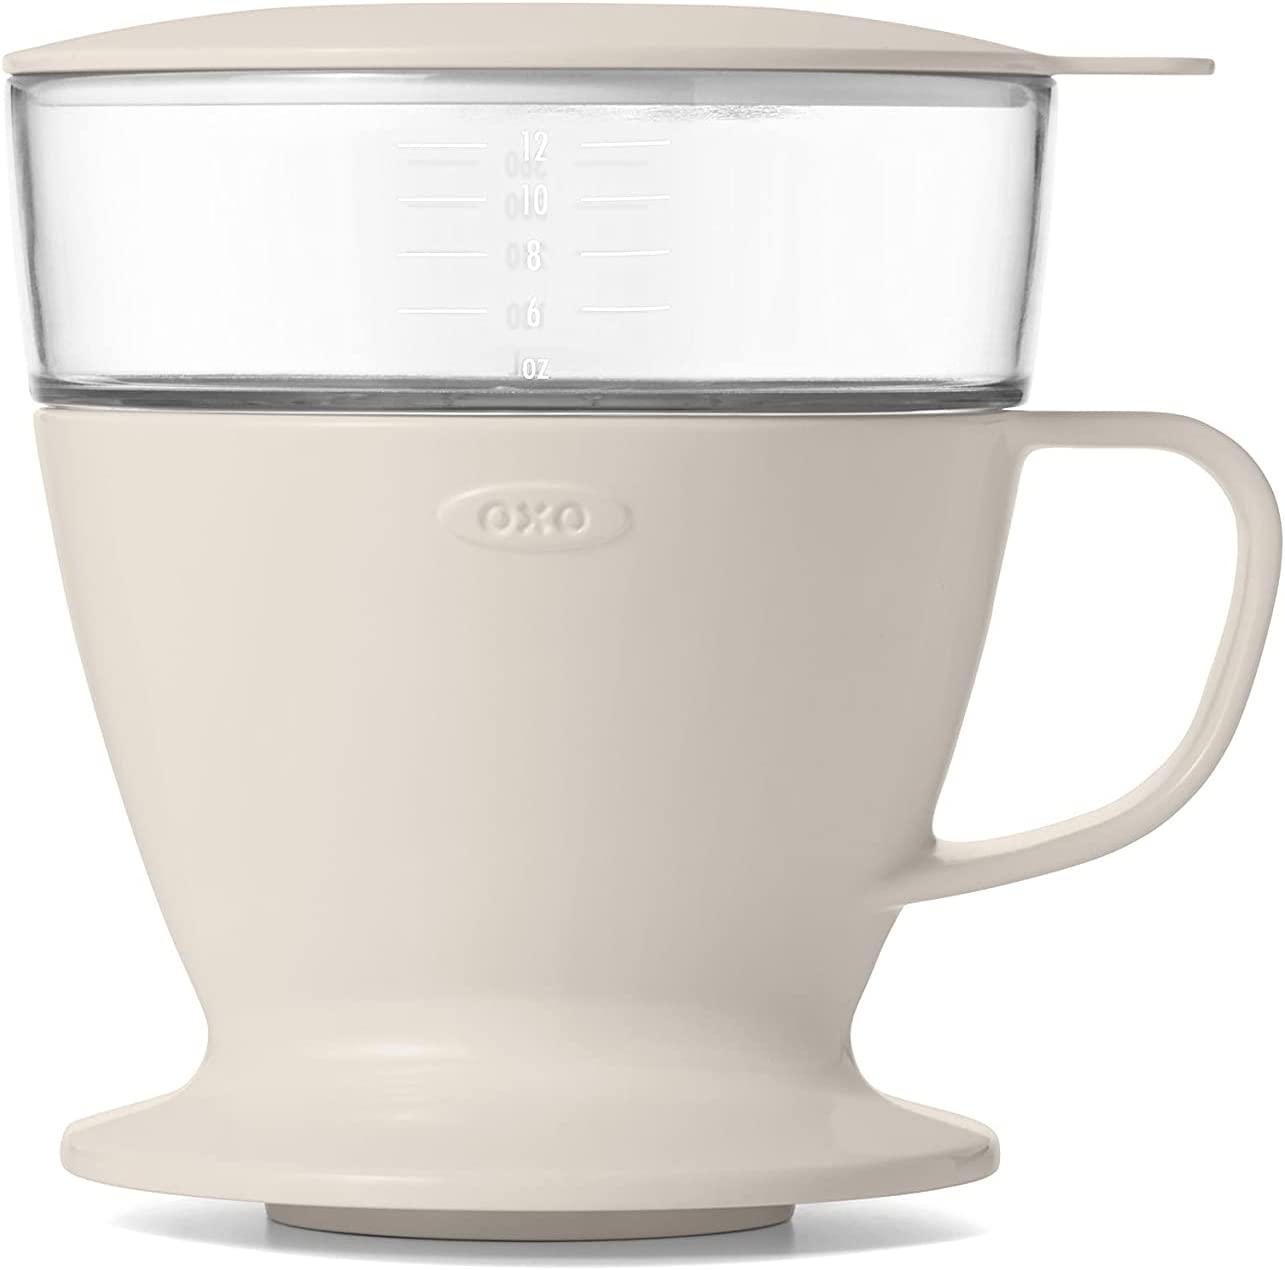 OXO Brew Single Serve Pour-Over Coffee Maker for $13.99